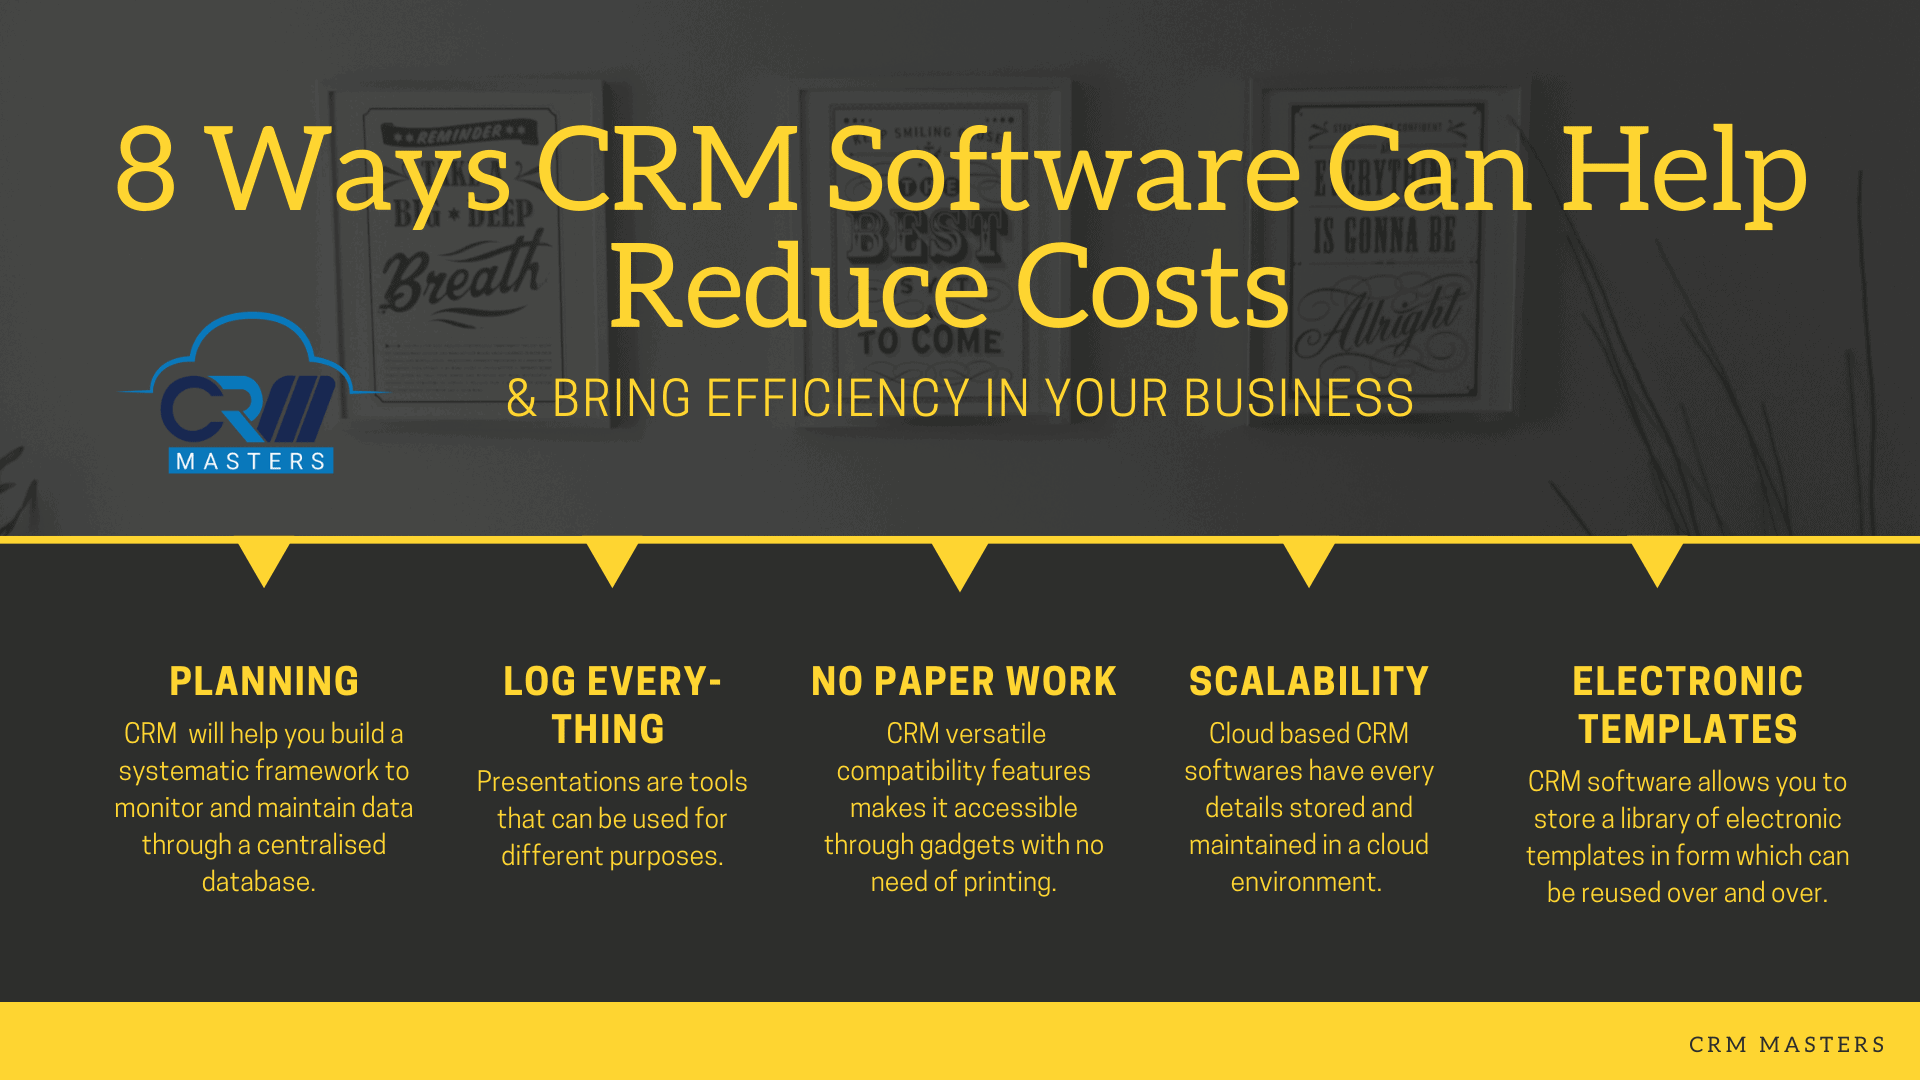 8 Ways CRM Software Can Help Reduce Costs & Bring Efficiency in Your Business